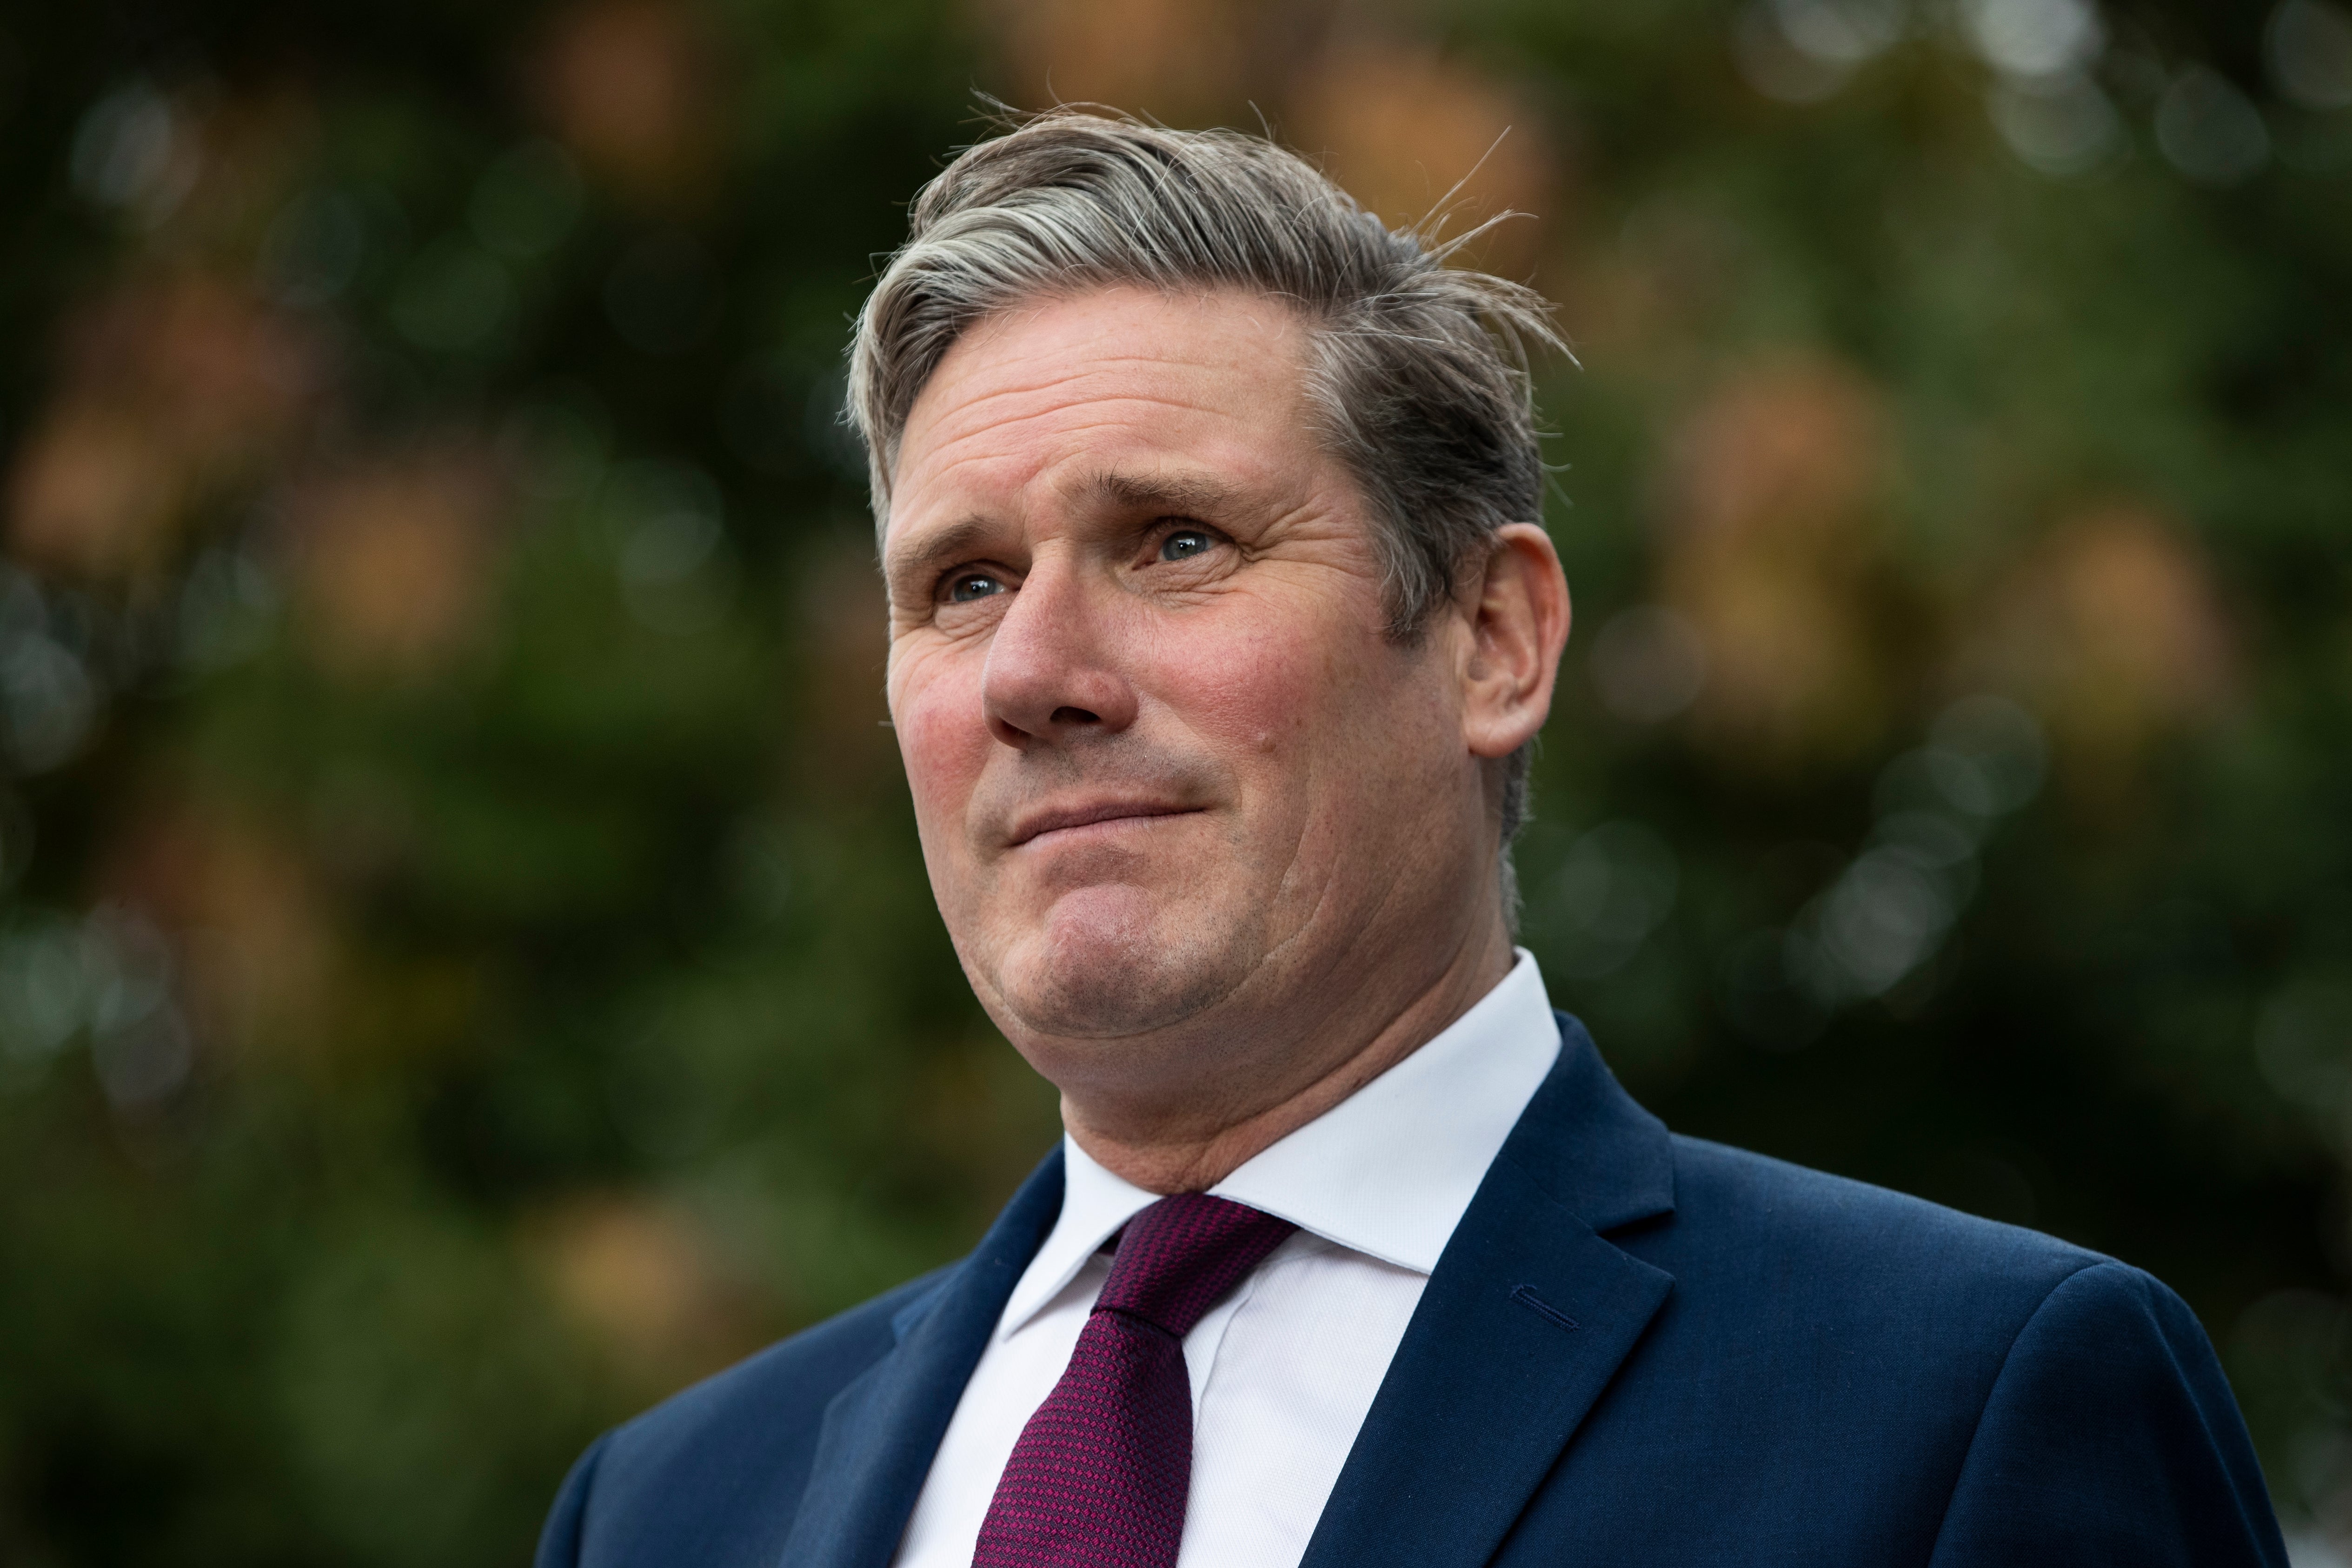 Labour leader Keir Starmer called for the government to be more transparent about its decisions